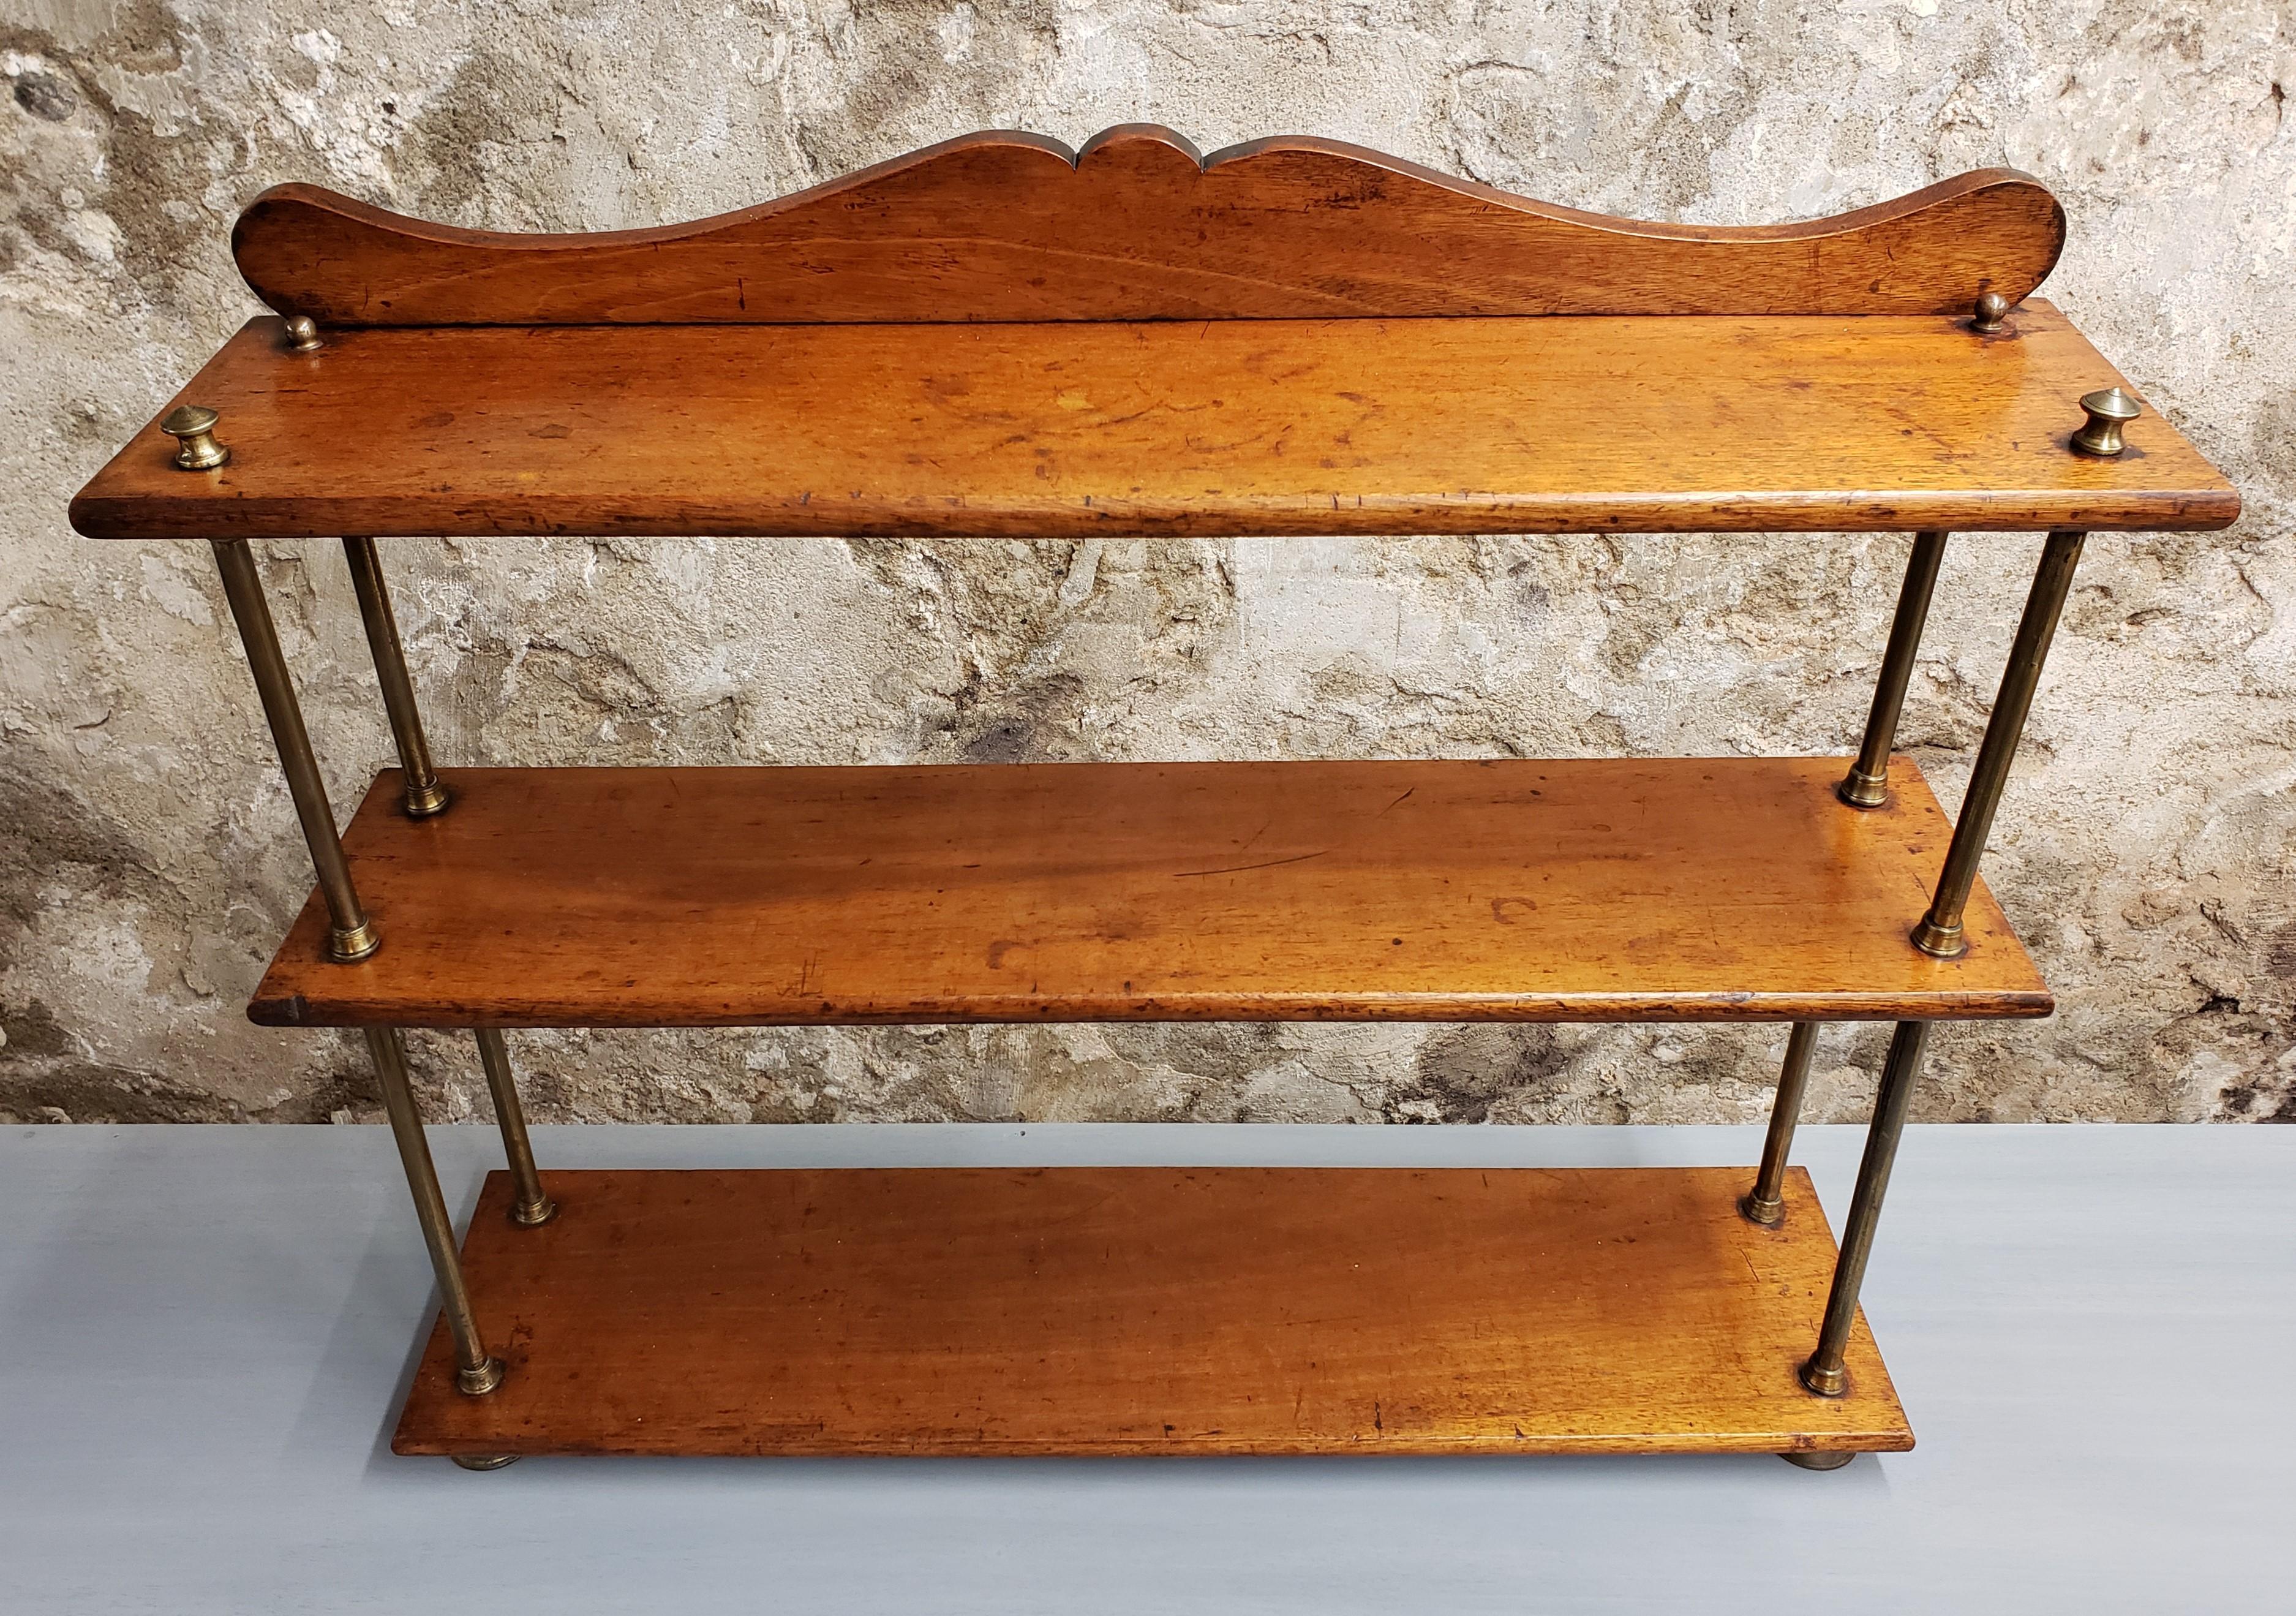 Tabletop shelving unit dating to the 19th century with beautiful rich patina.